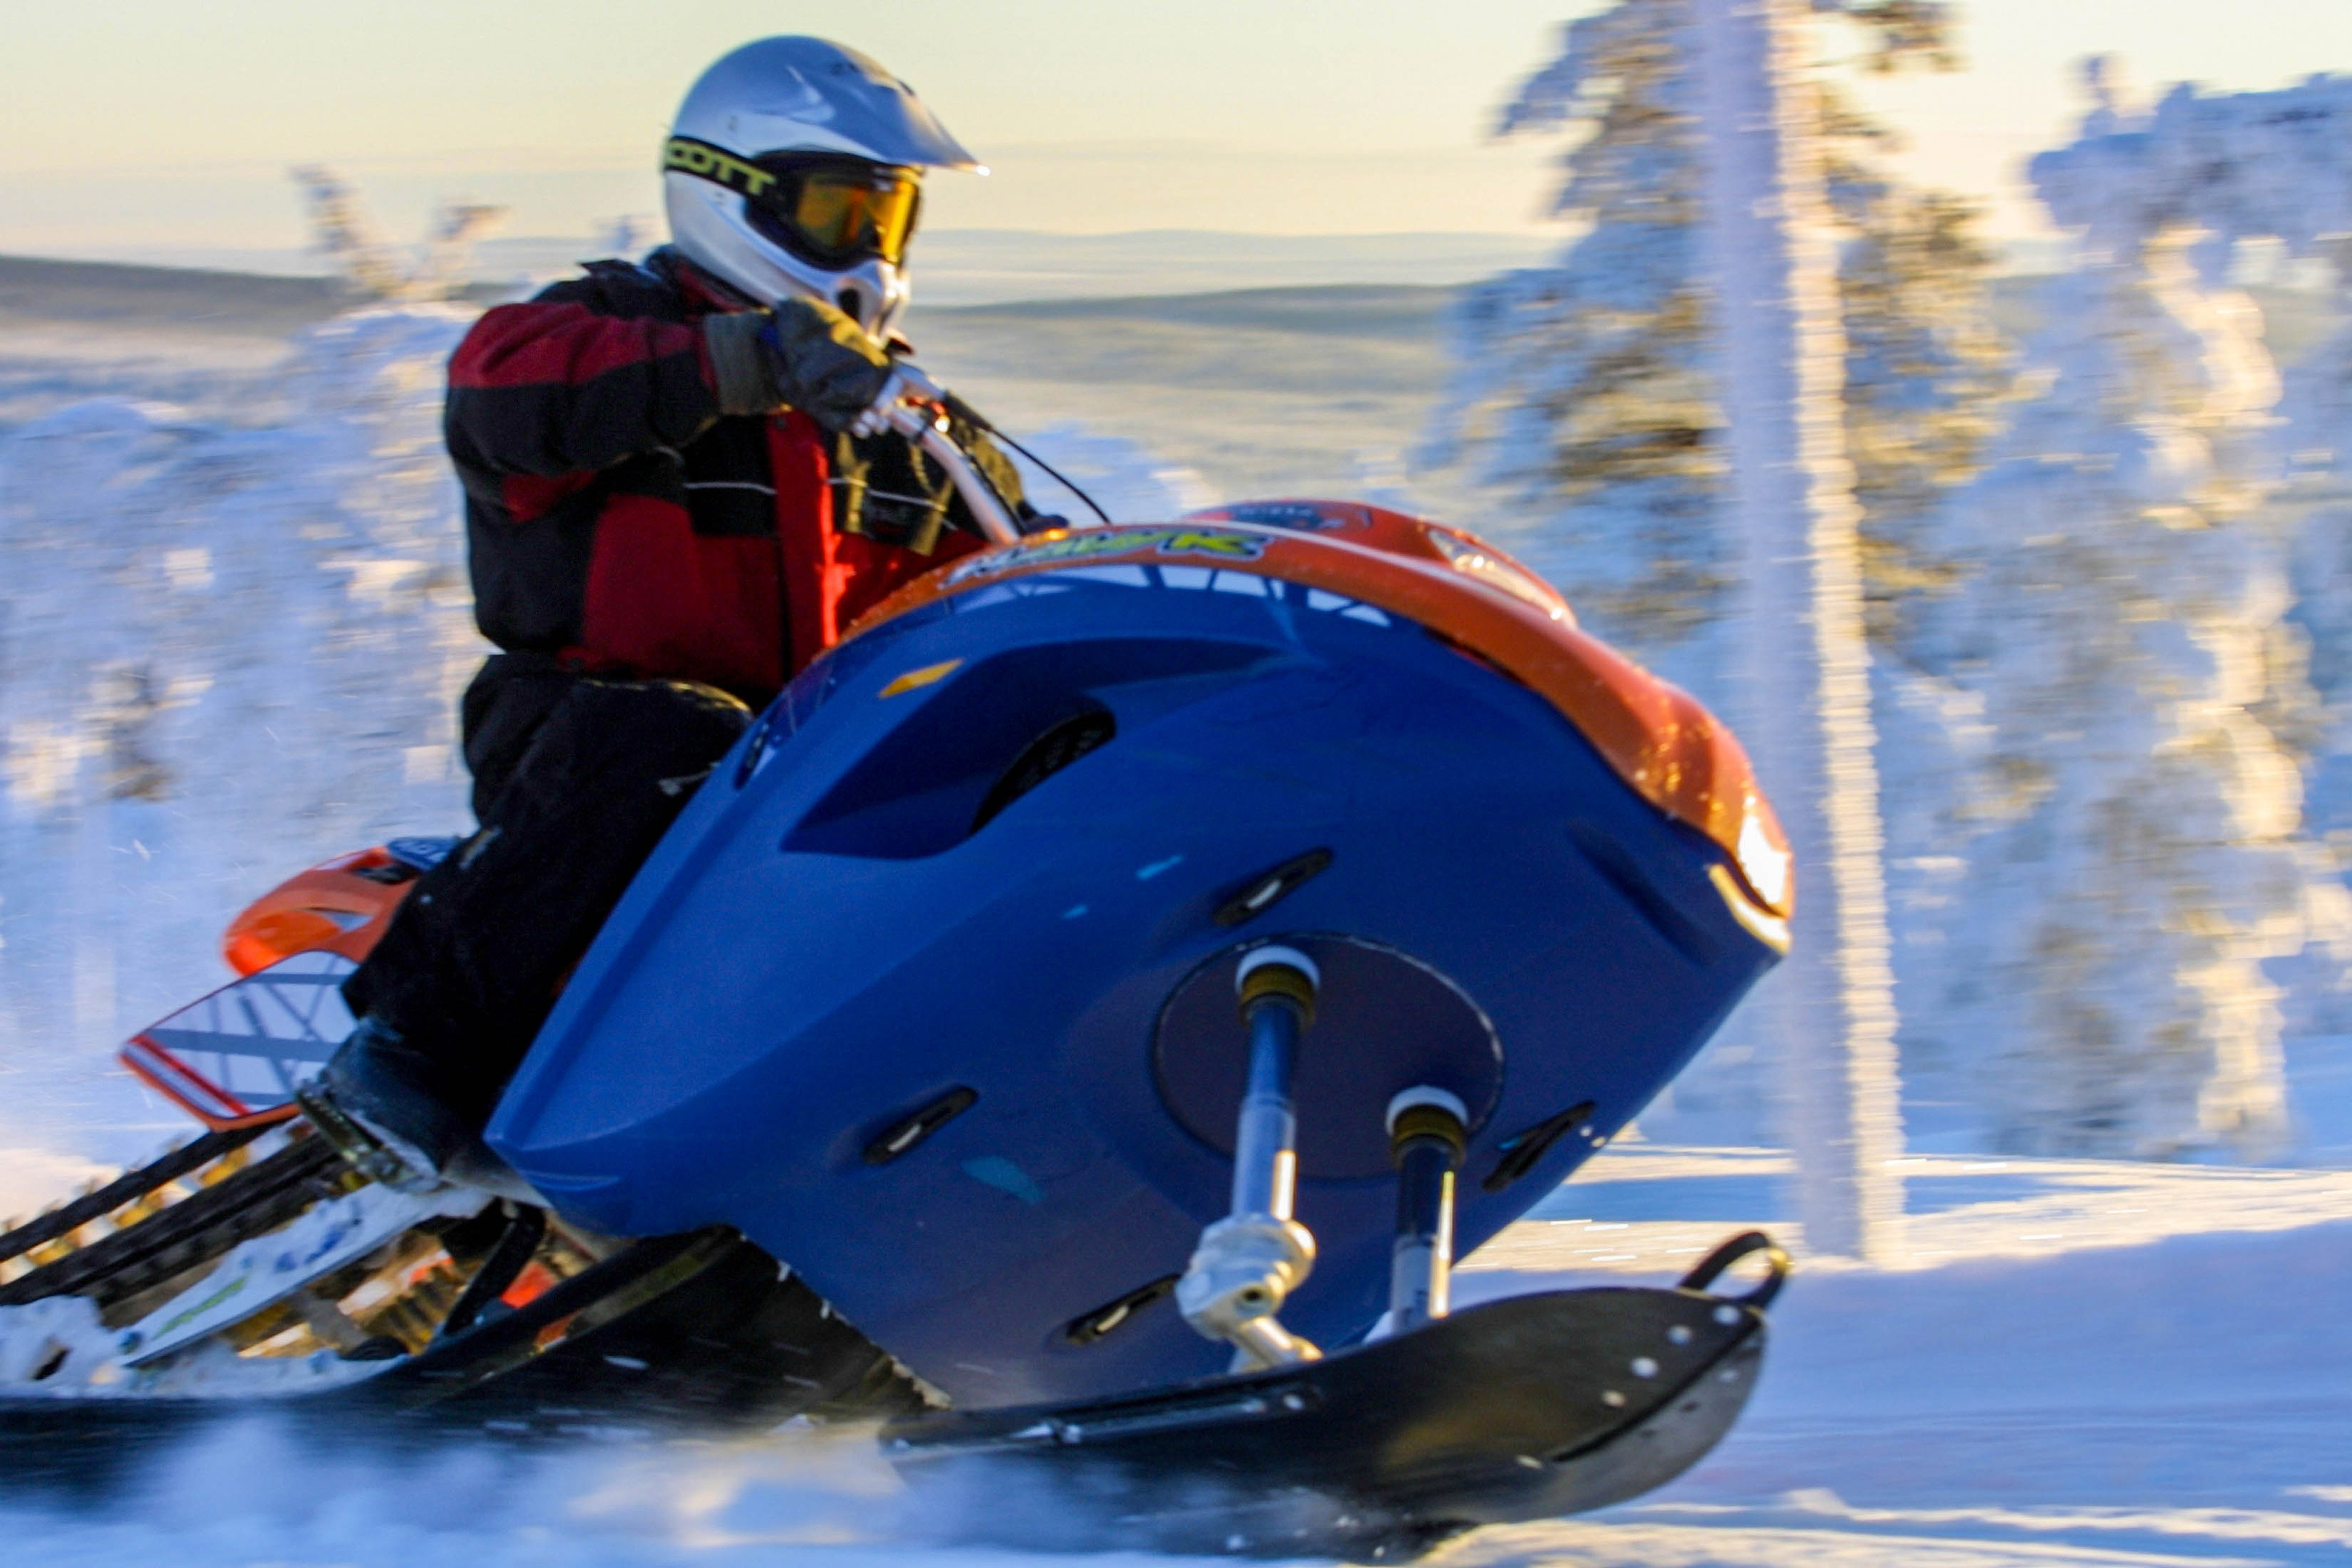 Slow start to snowmobiling season but outlook good